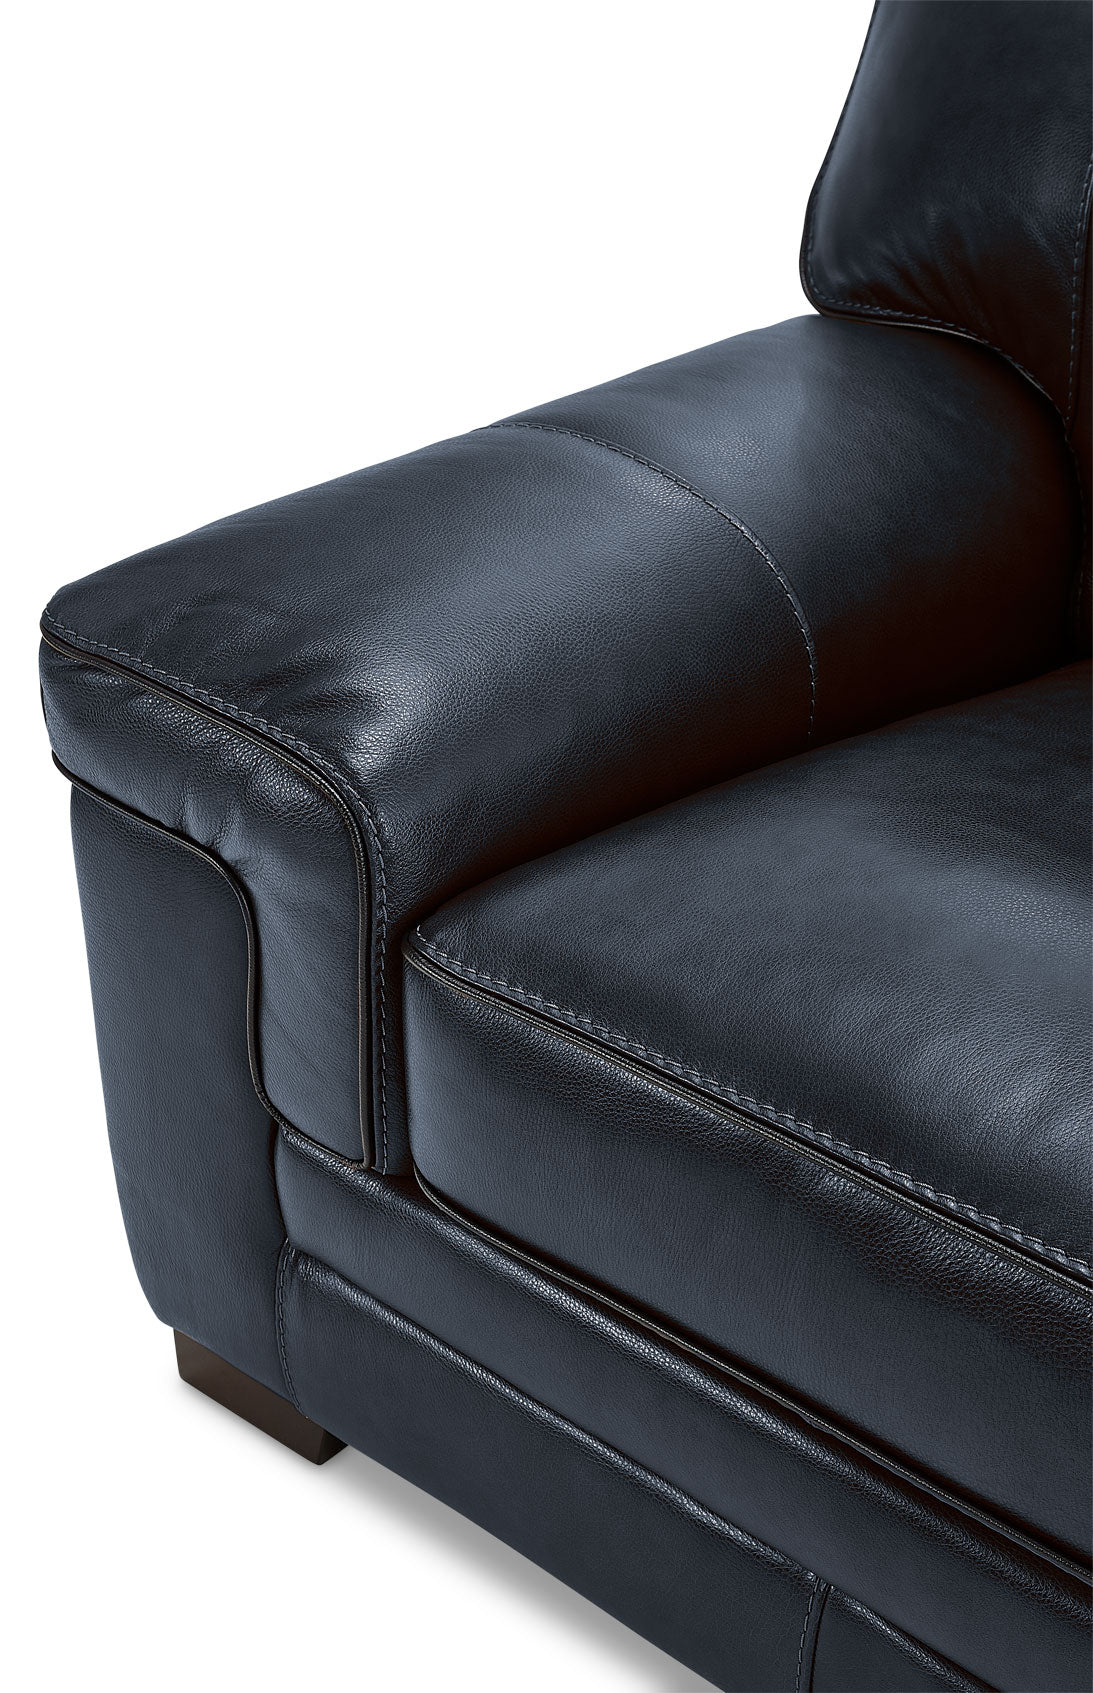 Stampede Leather Chair - Cobalt